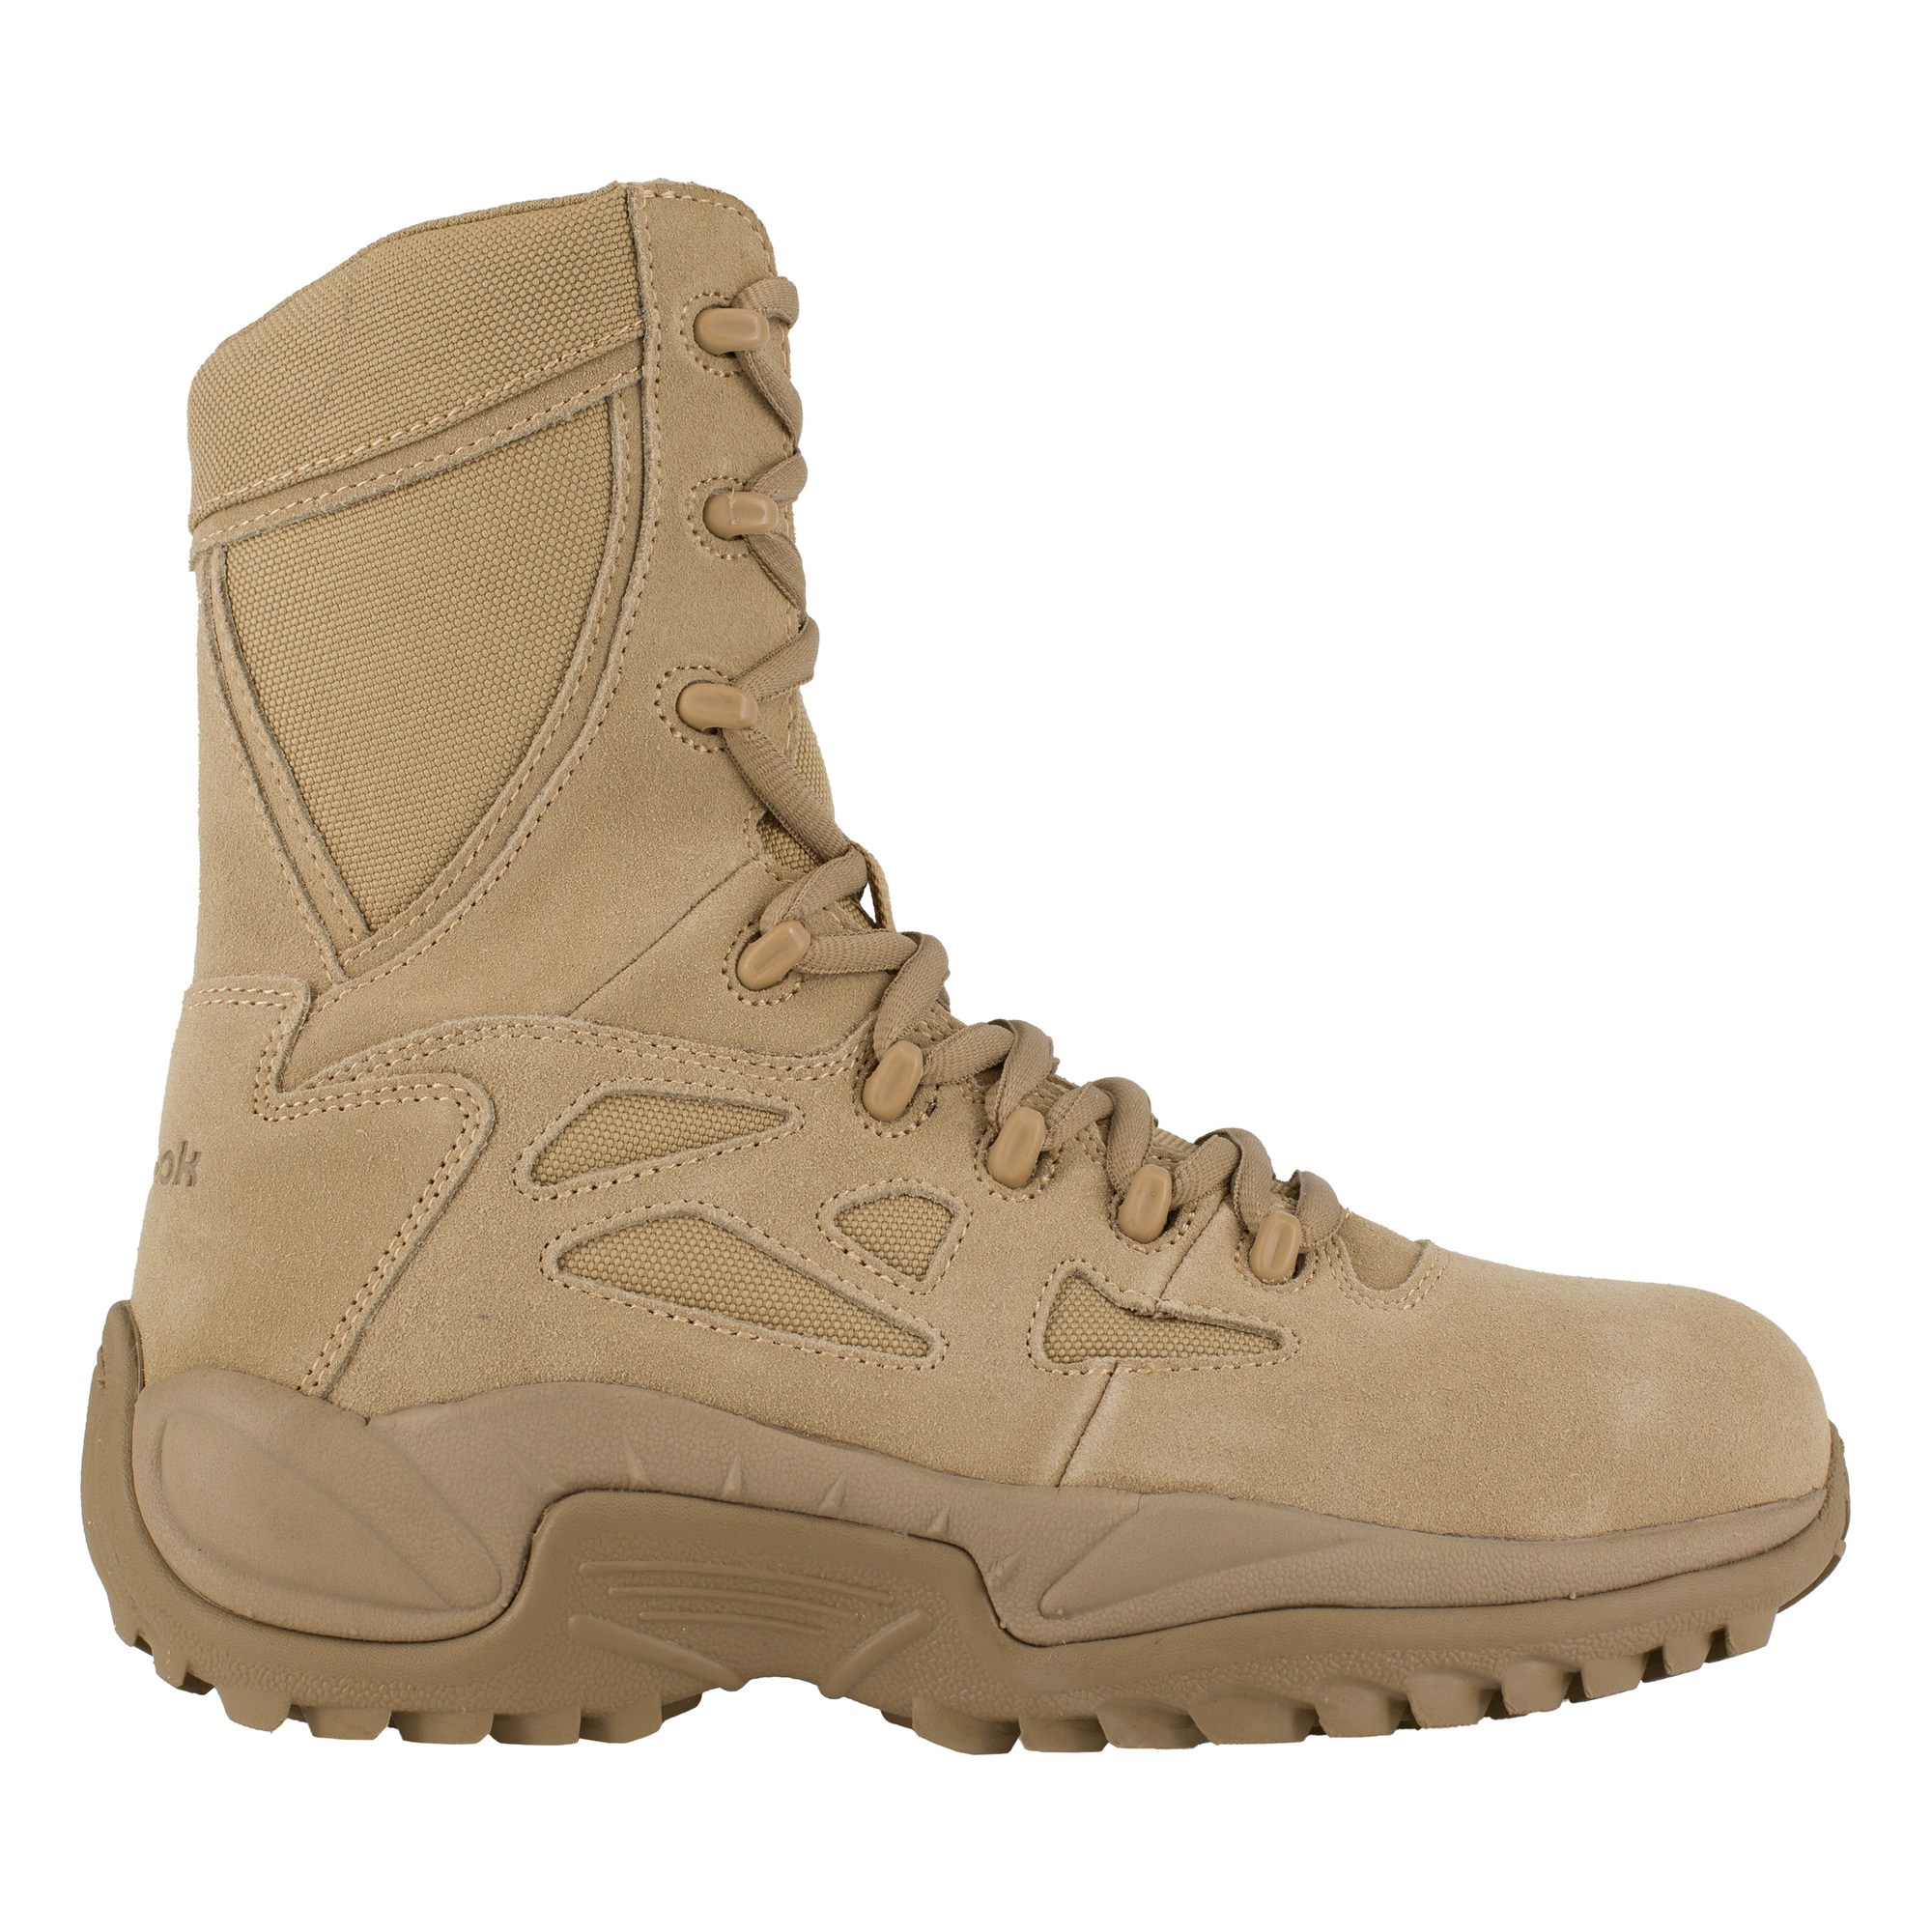 Reebok, 8Inch Stealth Tactical Boot with Side Zipper, Size 8 1/2, Width Medium, Color Desert Tan, Model RB894 -  RB894-M-08.5